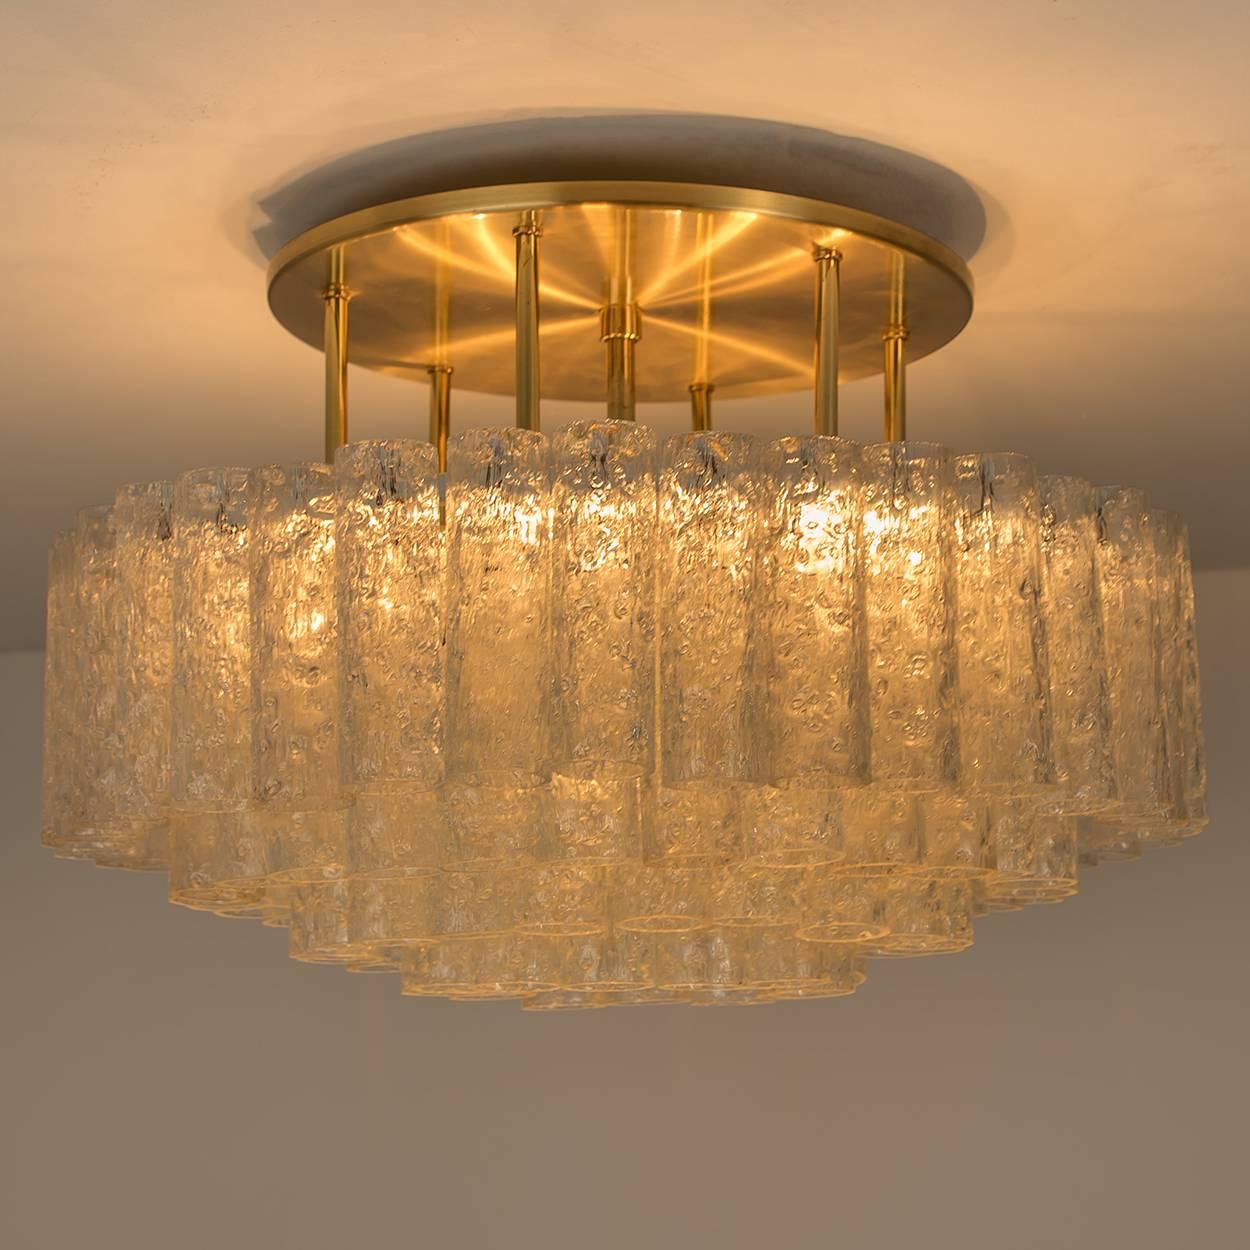 Set of Three Large Glass Brass Light Fixtures by Doria, Germany, 1969 In Good Condition For Sale In Rijssen, NL